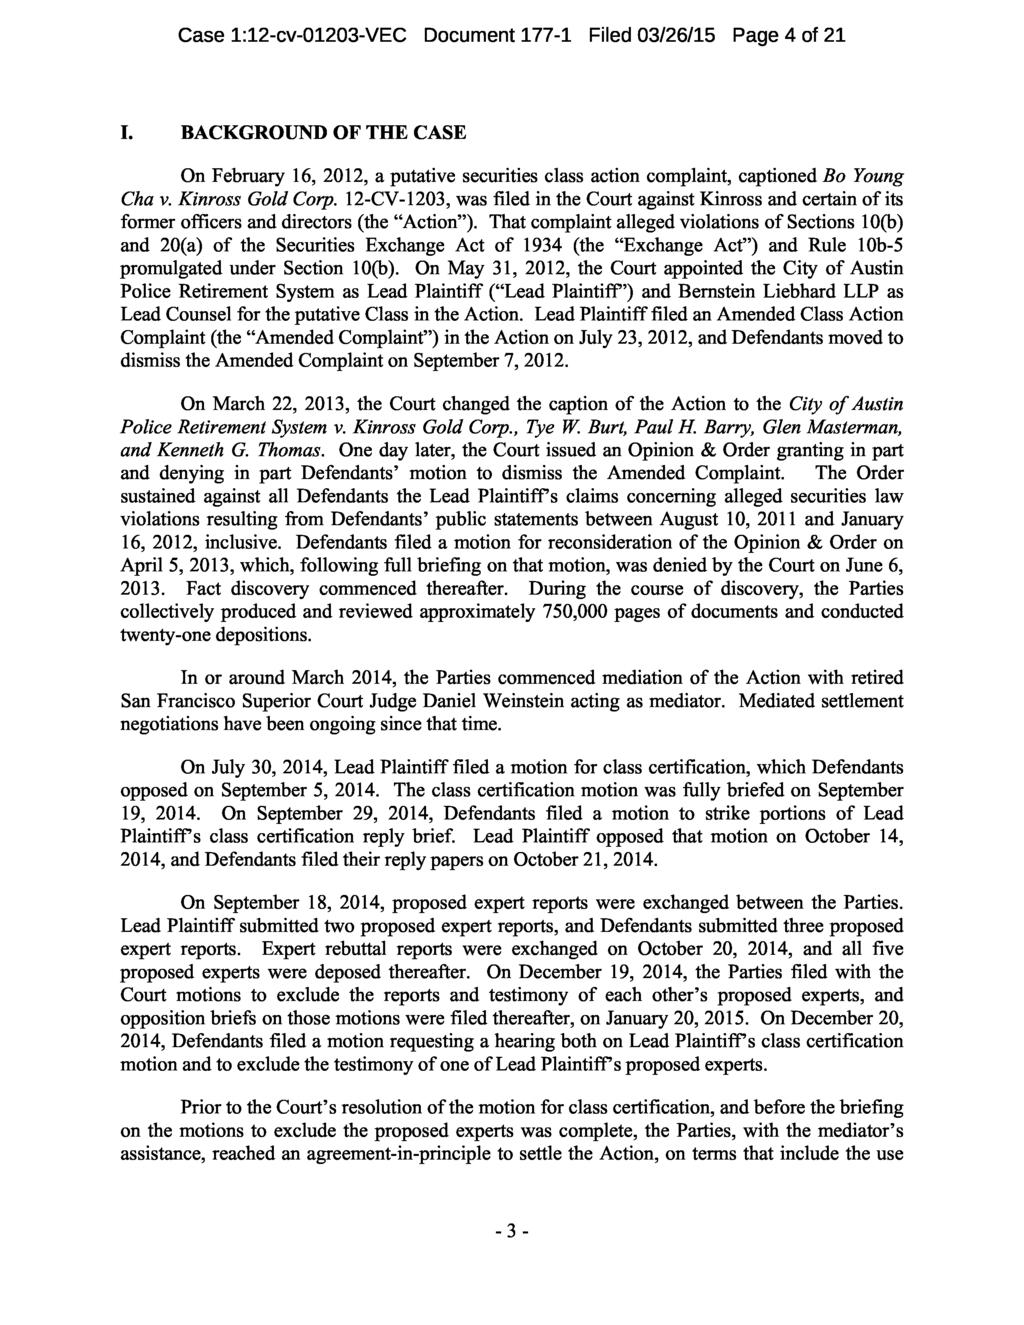 Case 1:12-cv-01203-VEC Document 177-1 Filed 03/26/15 Page 4 of 21 I. BACKGROUND OF THE CASE On February 16, 2012, a putative securities class action complaint, captioned Bo Young Cha v.